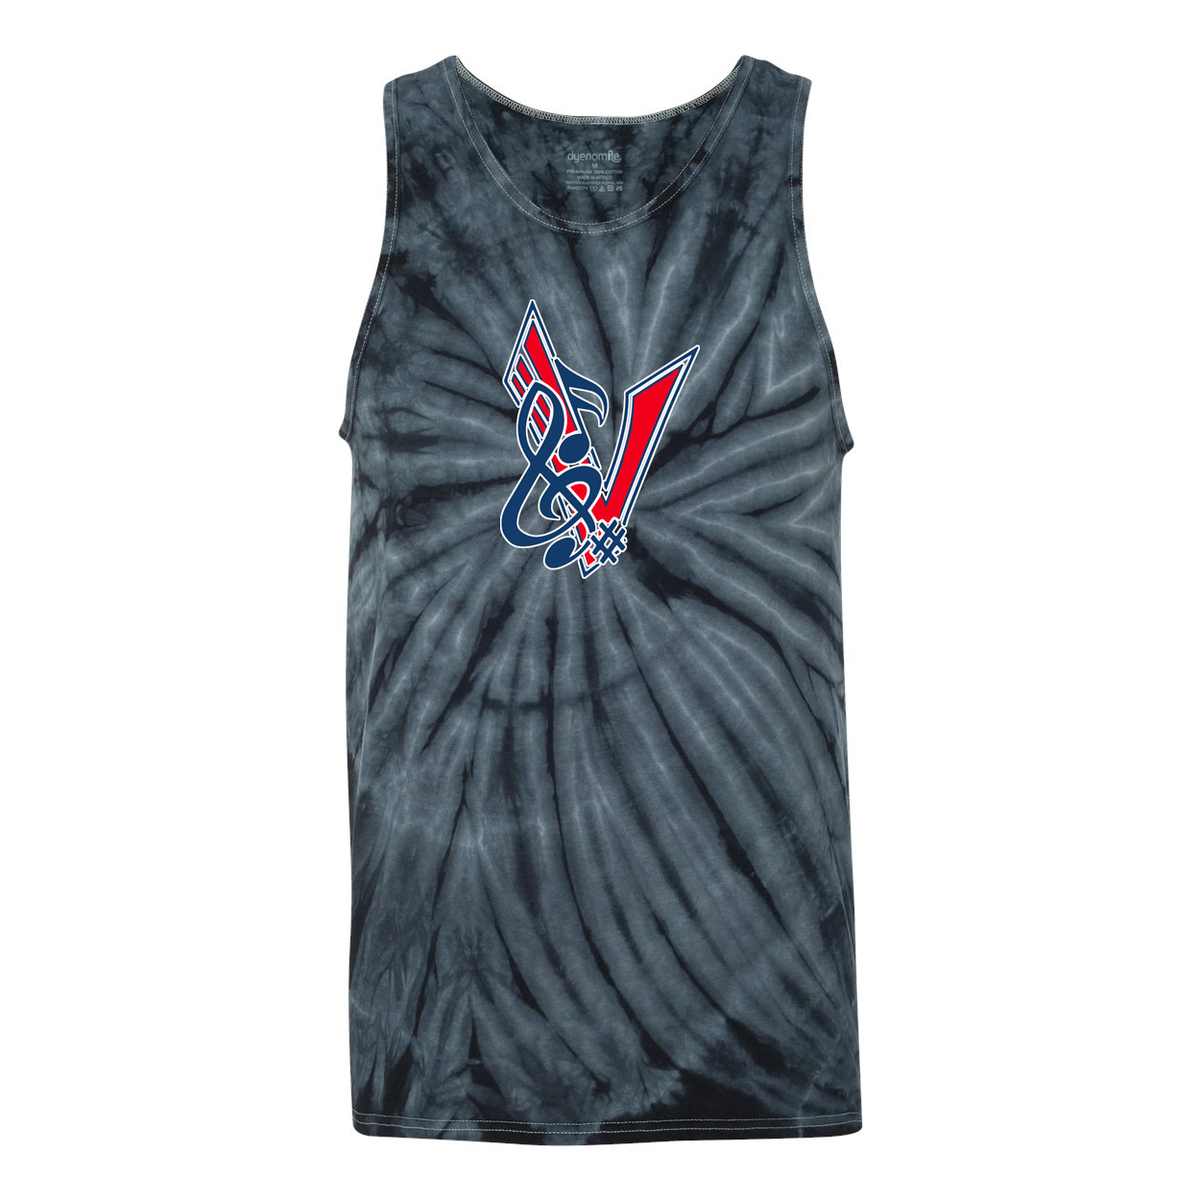 *NEW* Fort Walton Beach Vikings Band Unisex Cyclone Tie-Dyed Tank Top